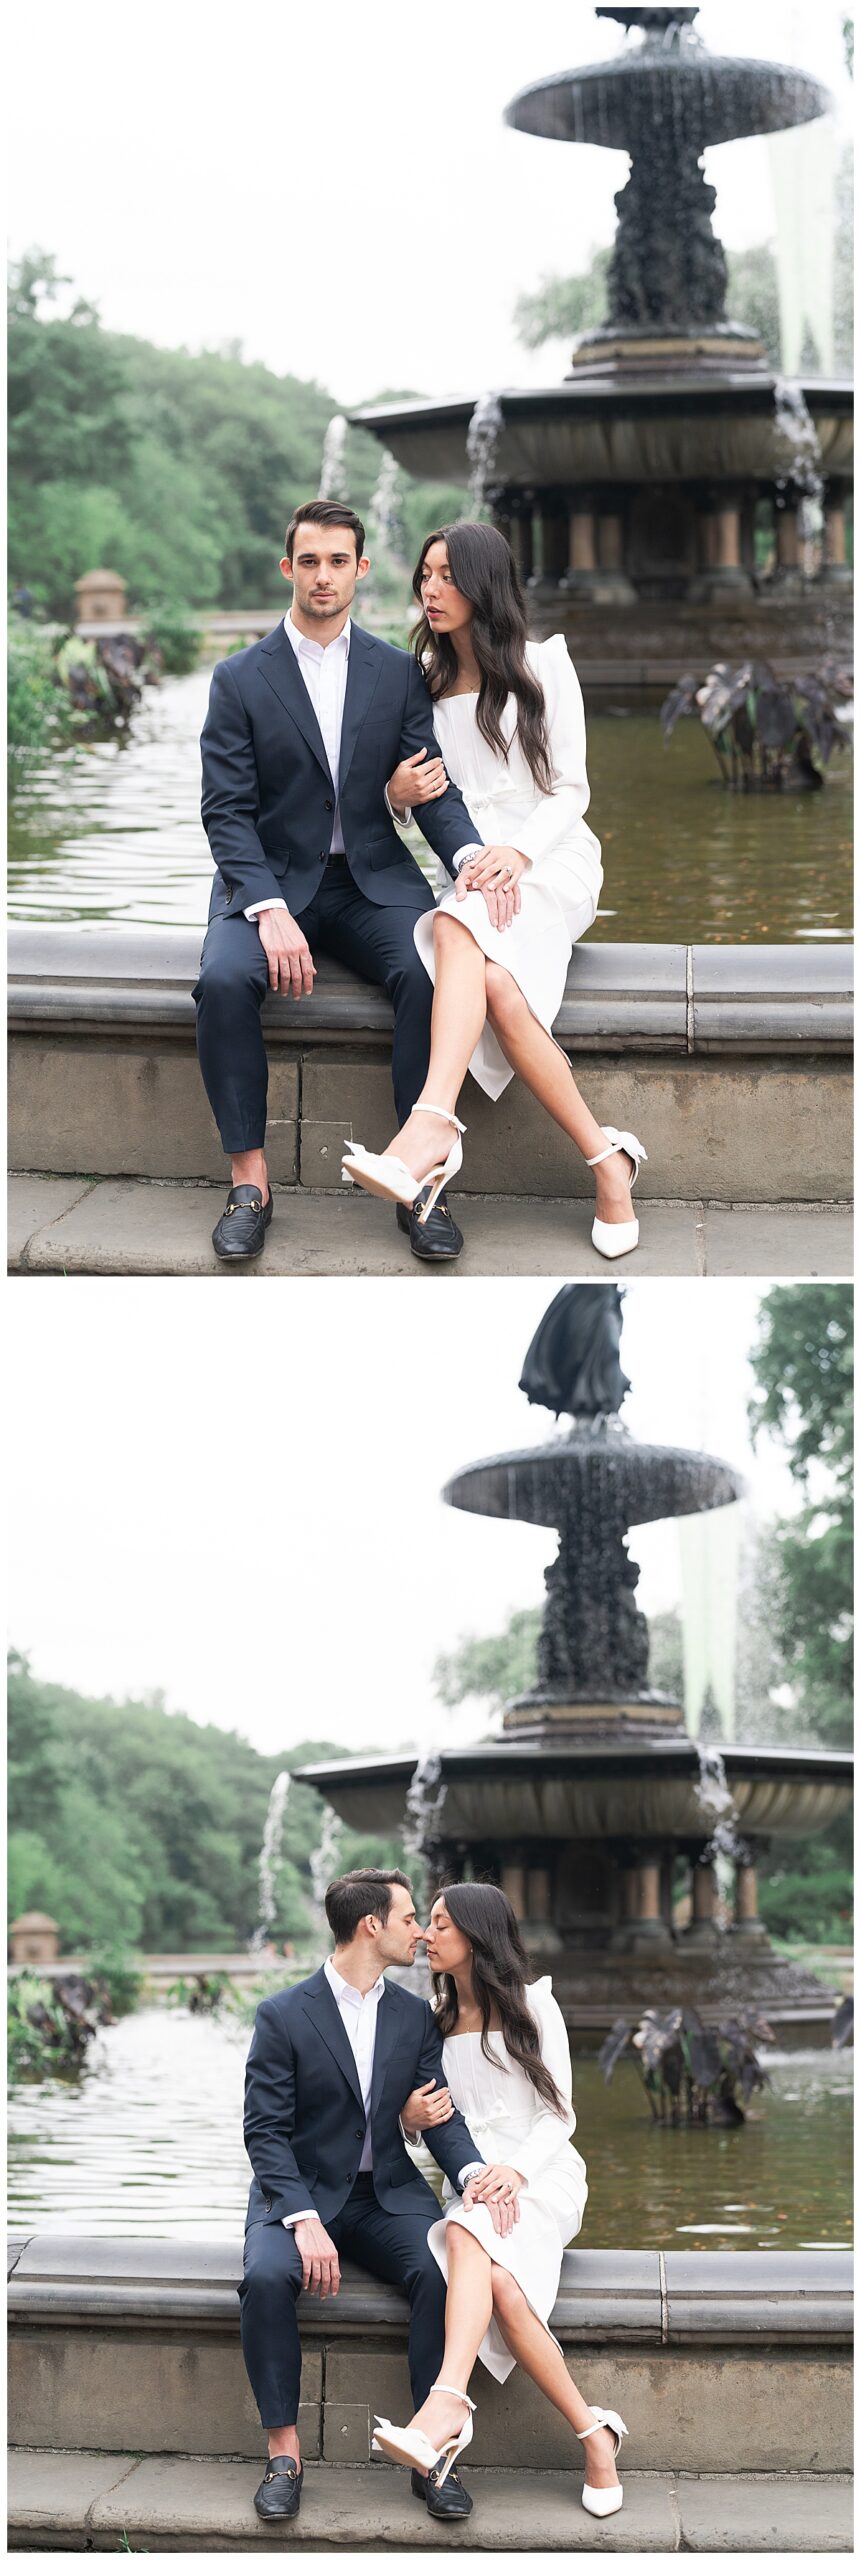 Man and woman sit near a fountain for Destination Engagement Session